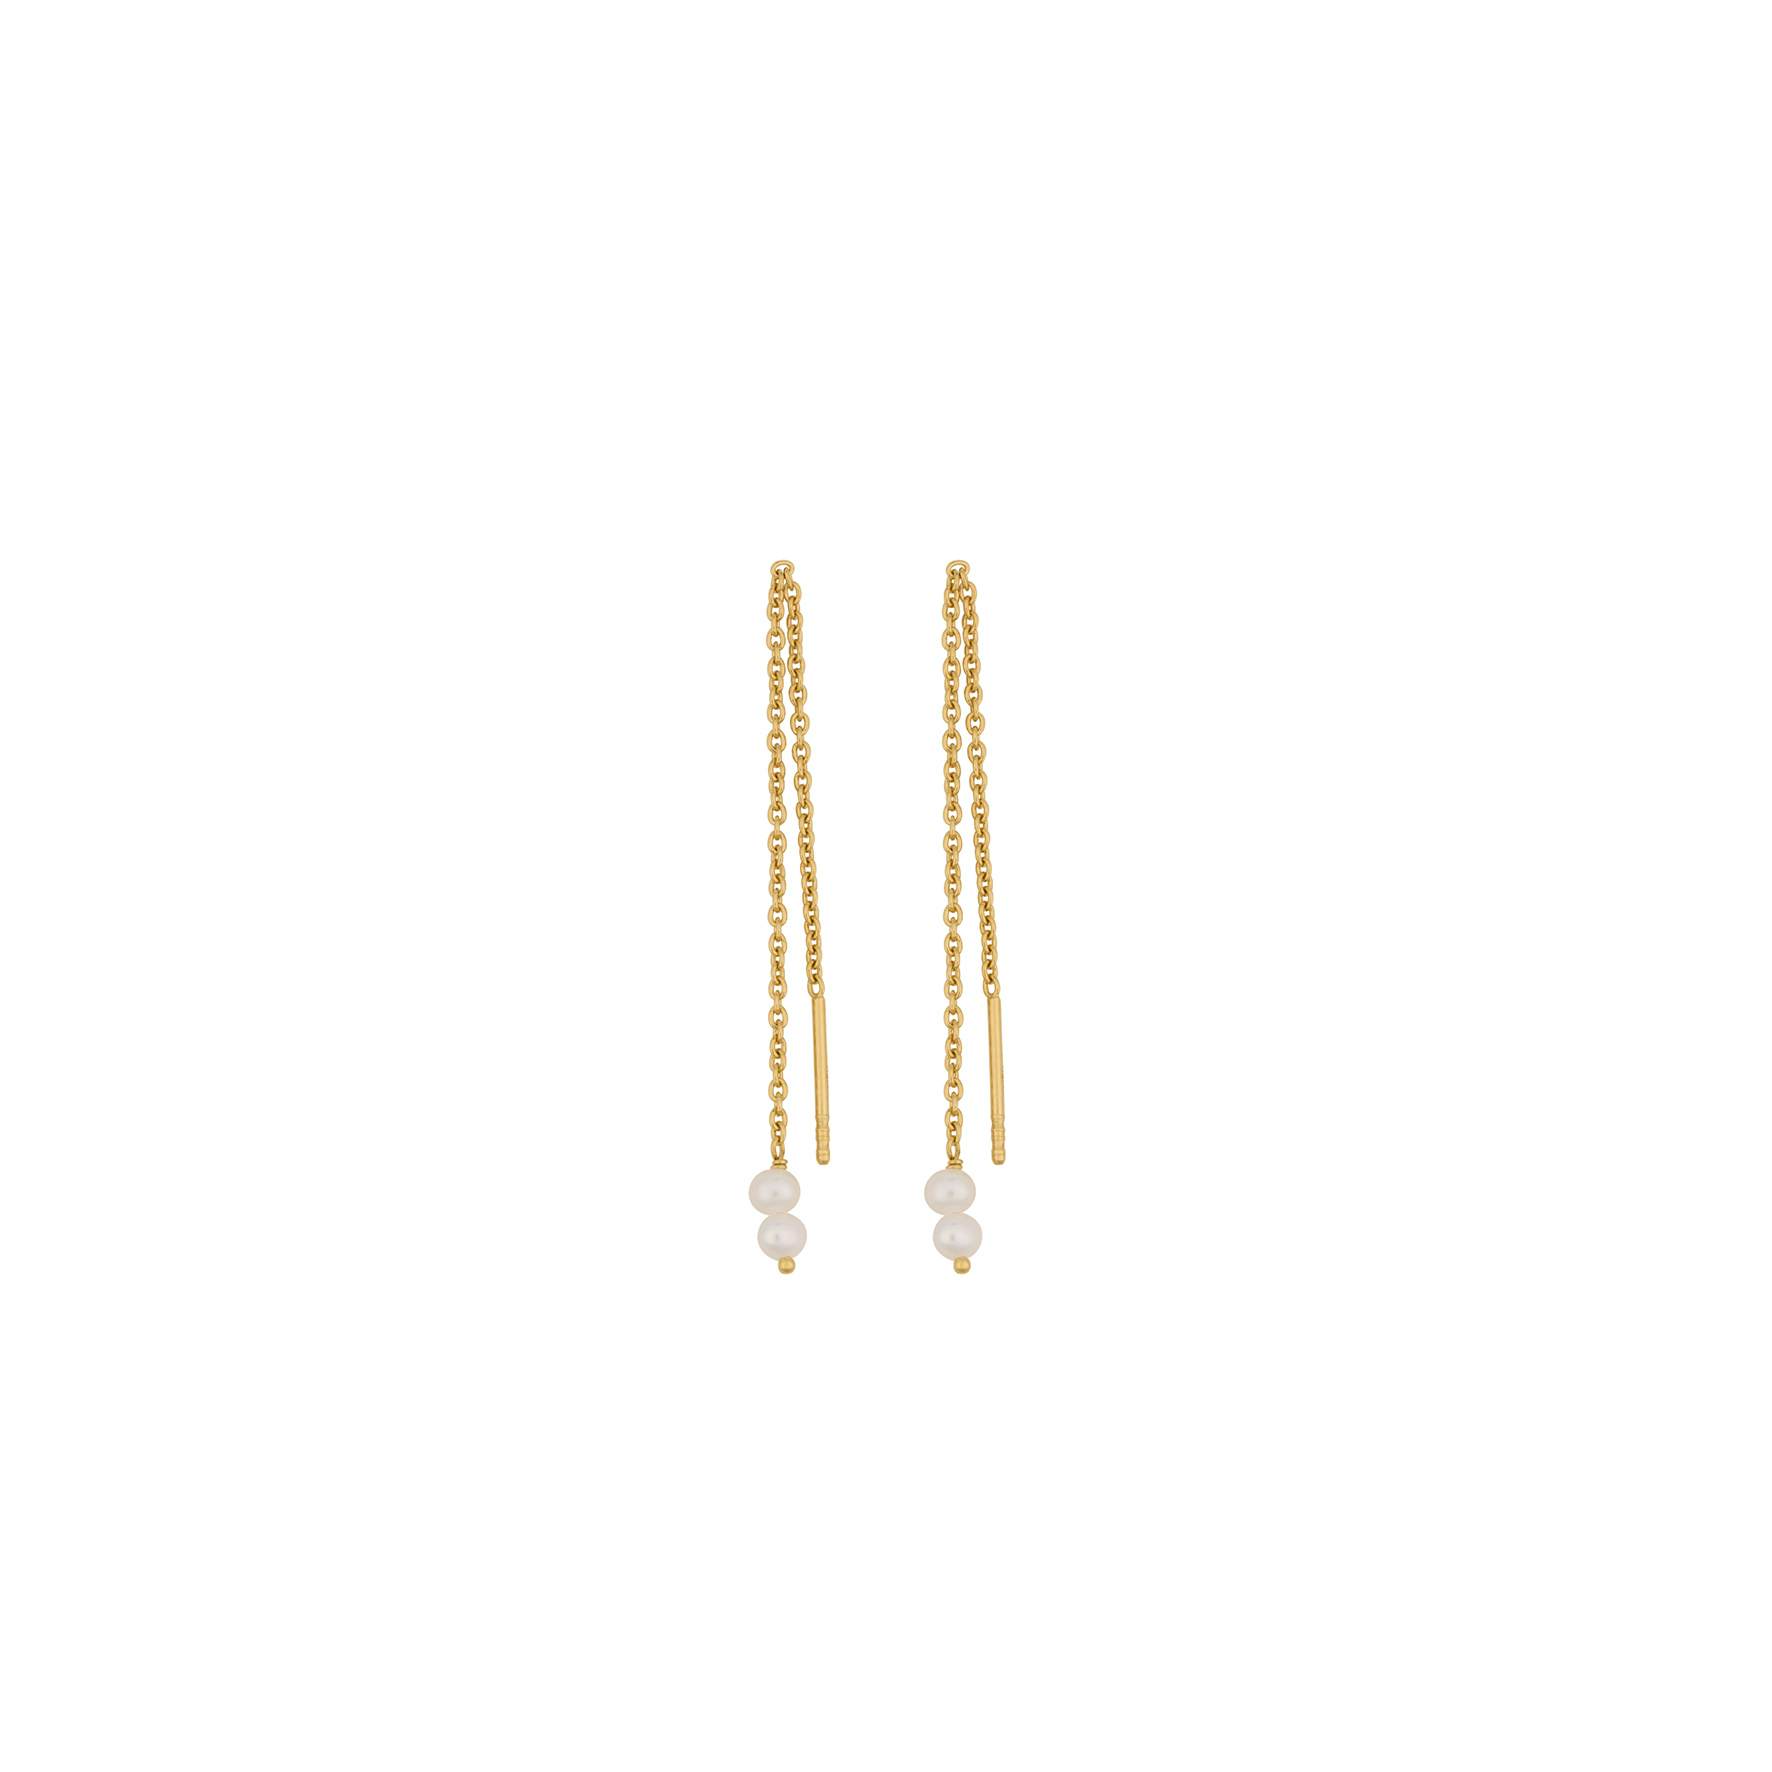 Ocean Dream Earchains from Pernille Corydon in Goldplated-Silver Sterling 925